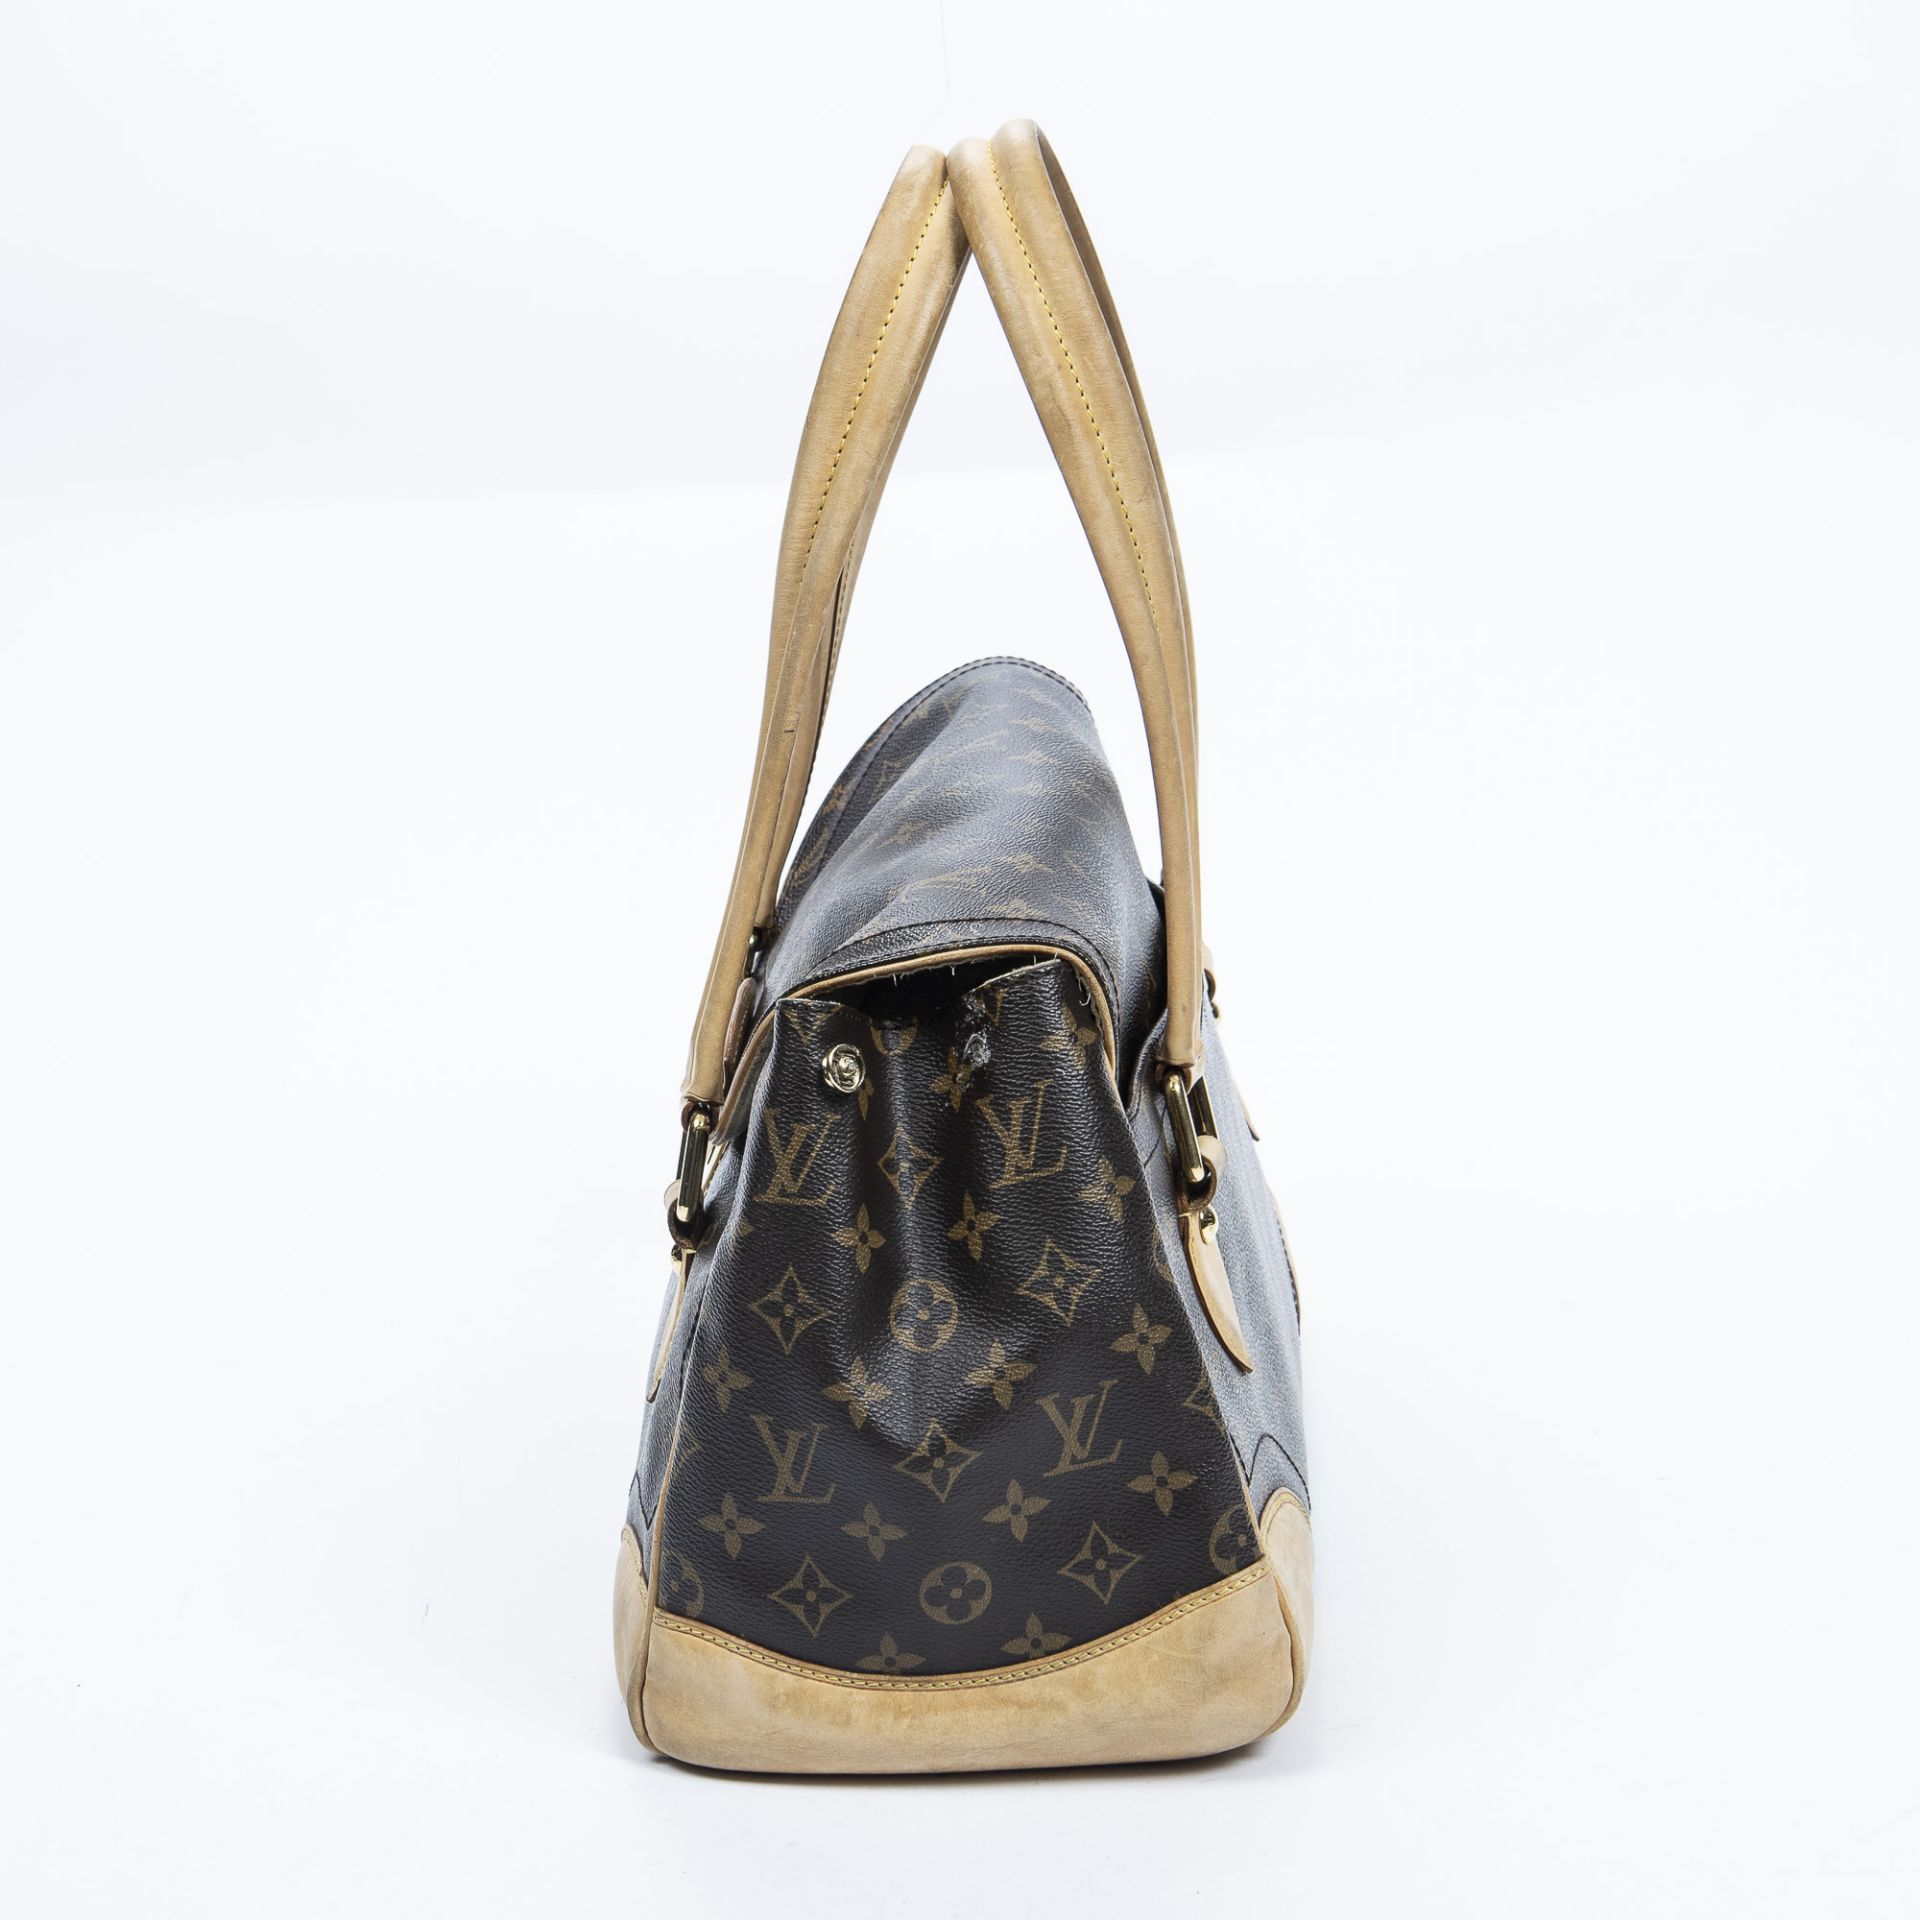 RRP £1,600.00 Lot To Contain 1 Louis Vuitton Coated Canvas Beverly Shoulder Bag In Brown - 41*31* - Image 3 of 3